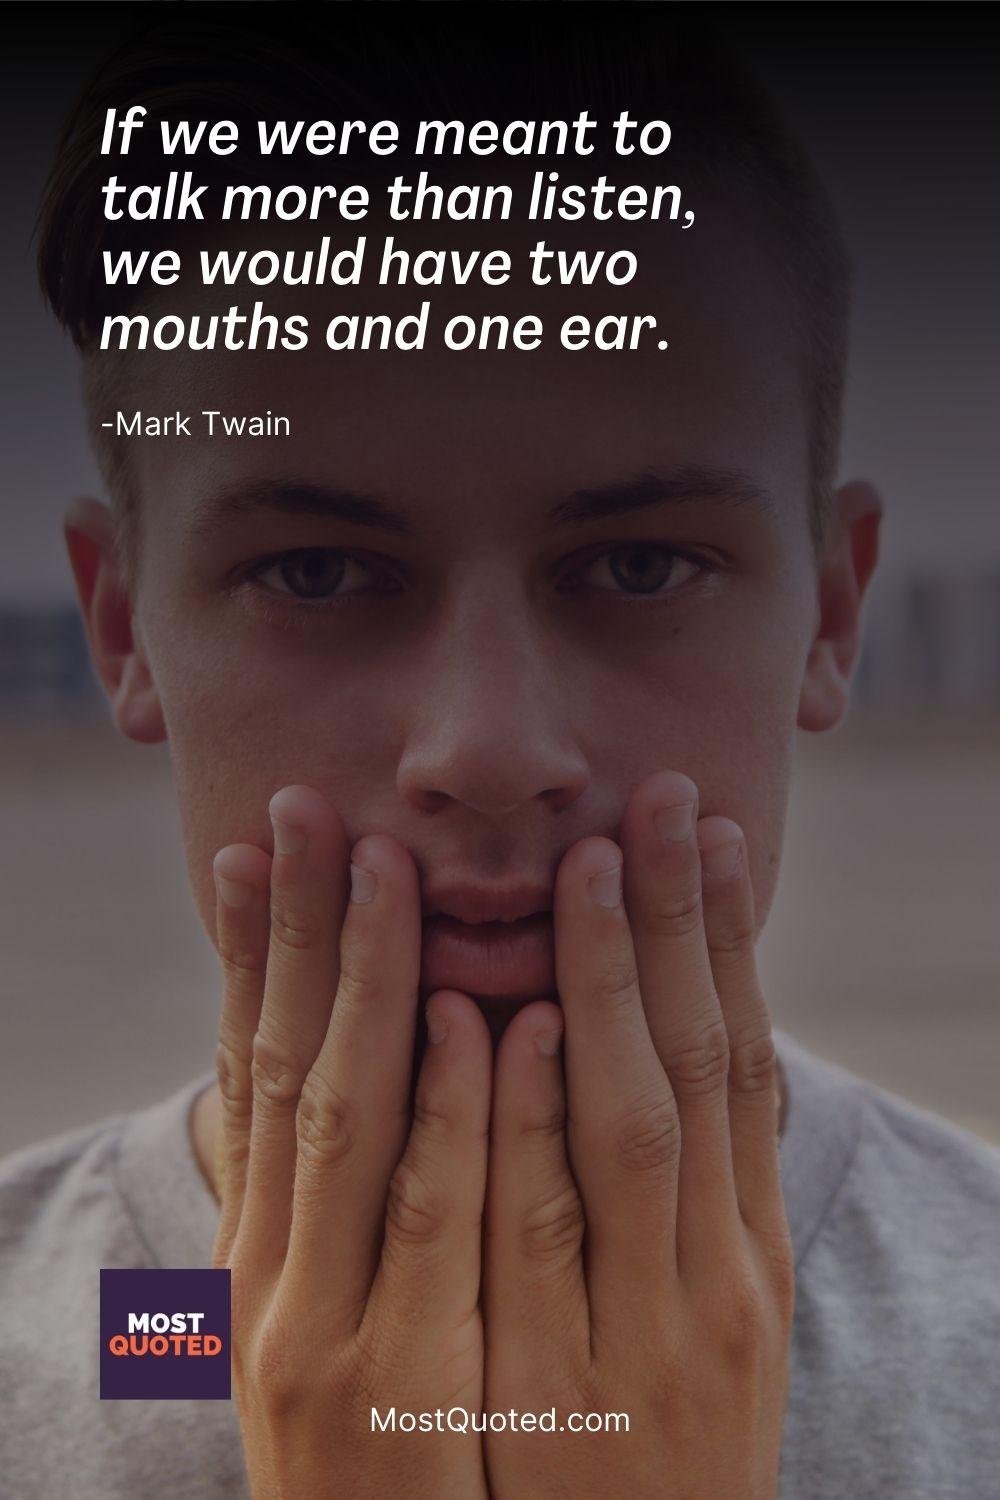 If we were meant to talk more than listen, we would have two mouths and one ear. - Mark Twain